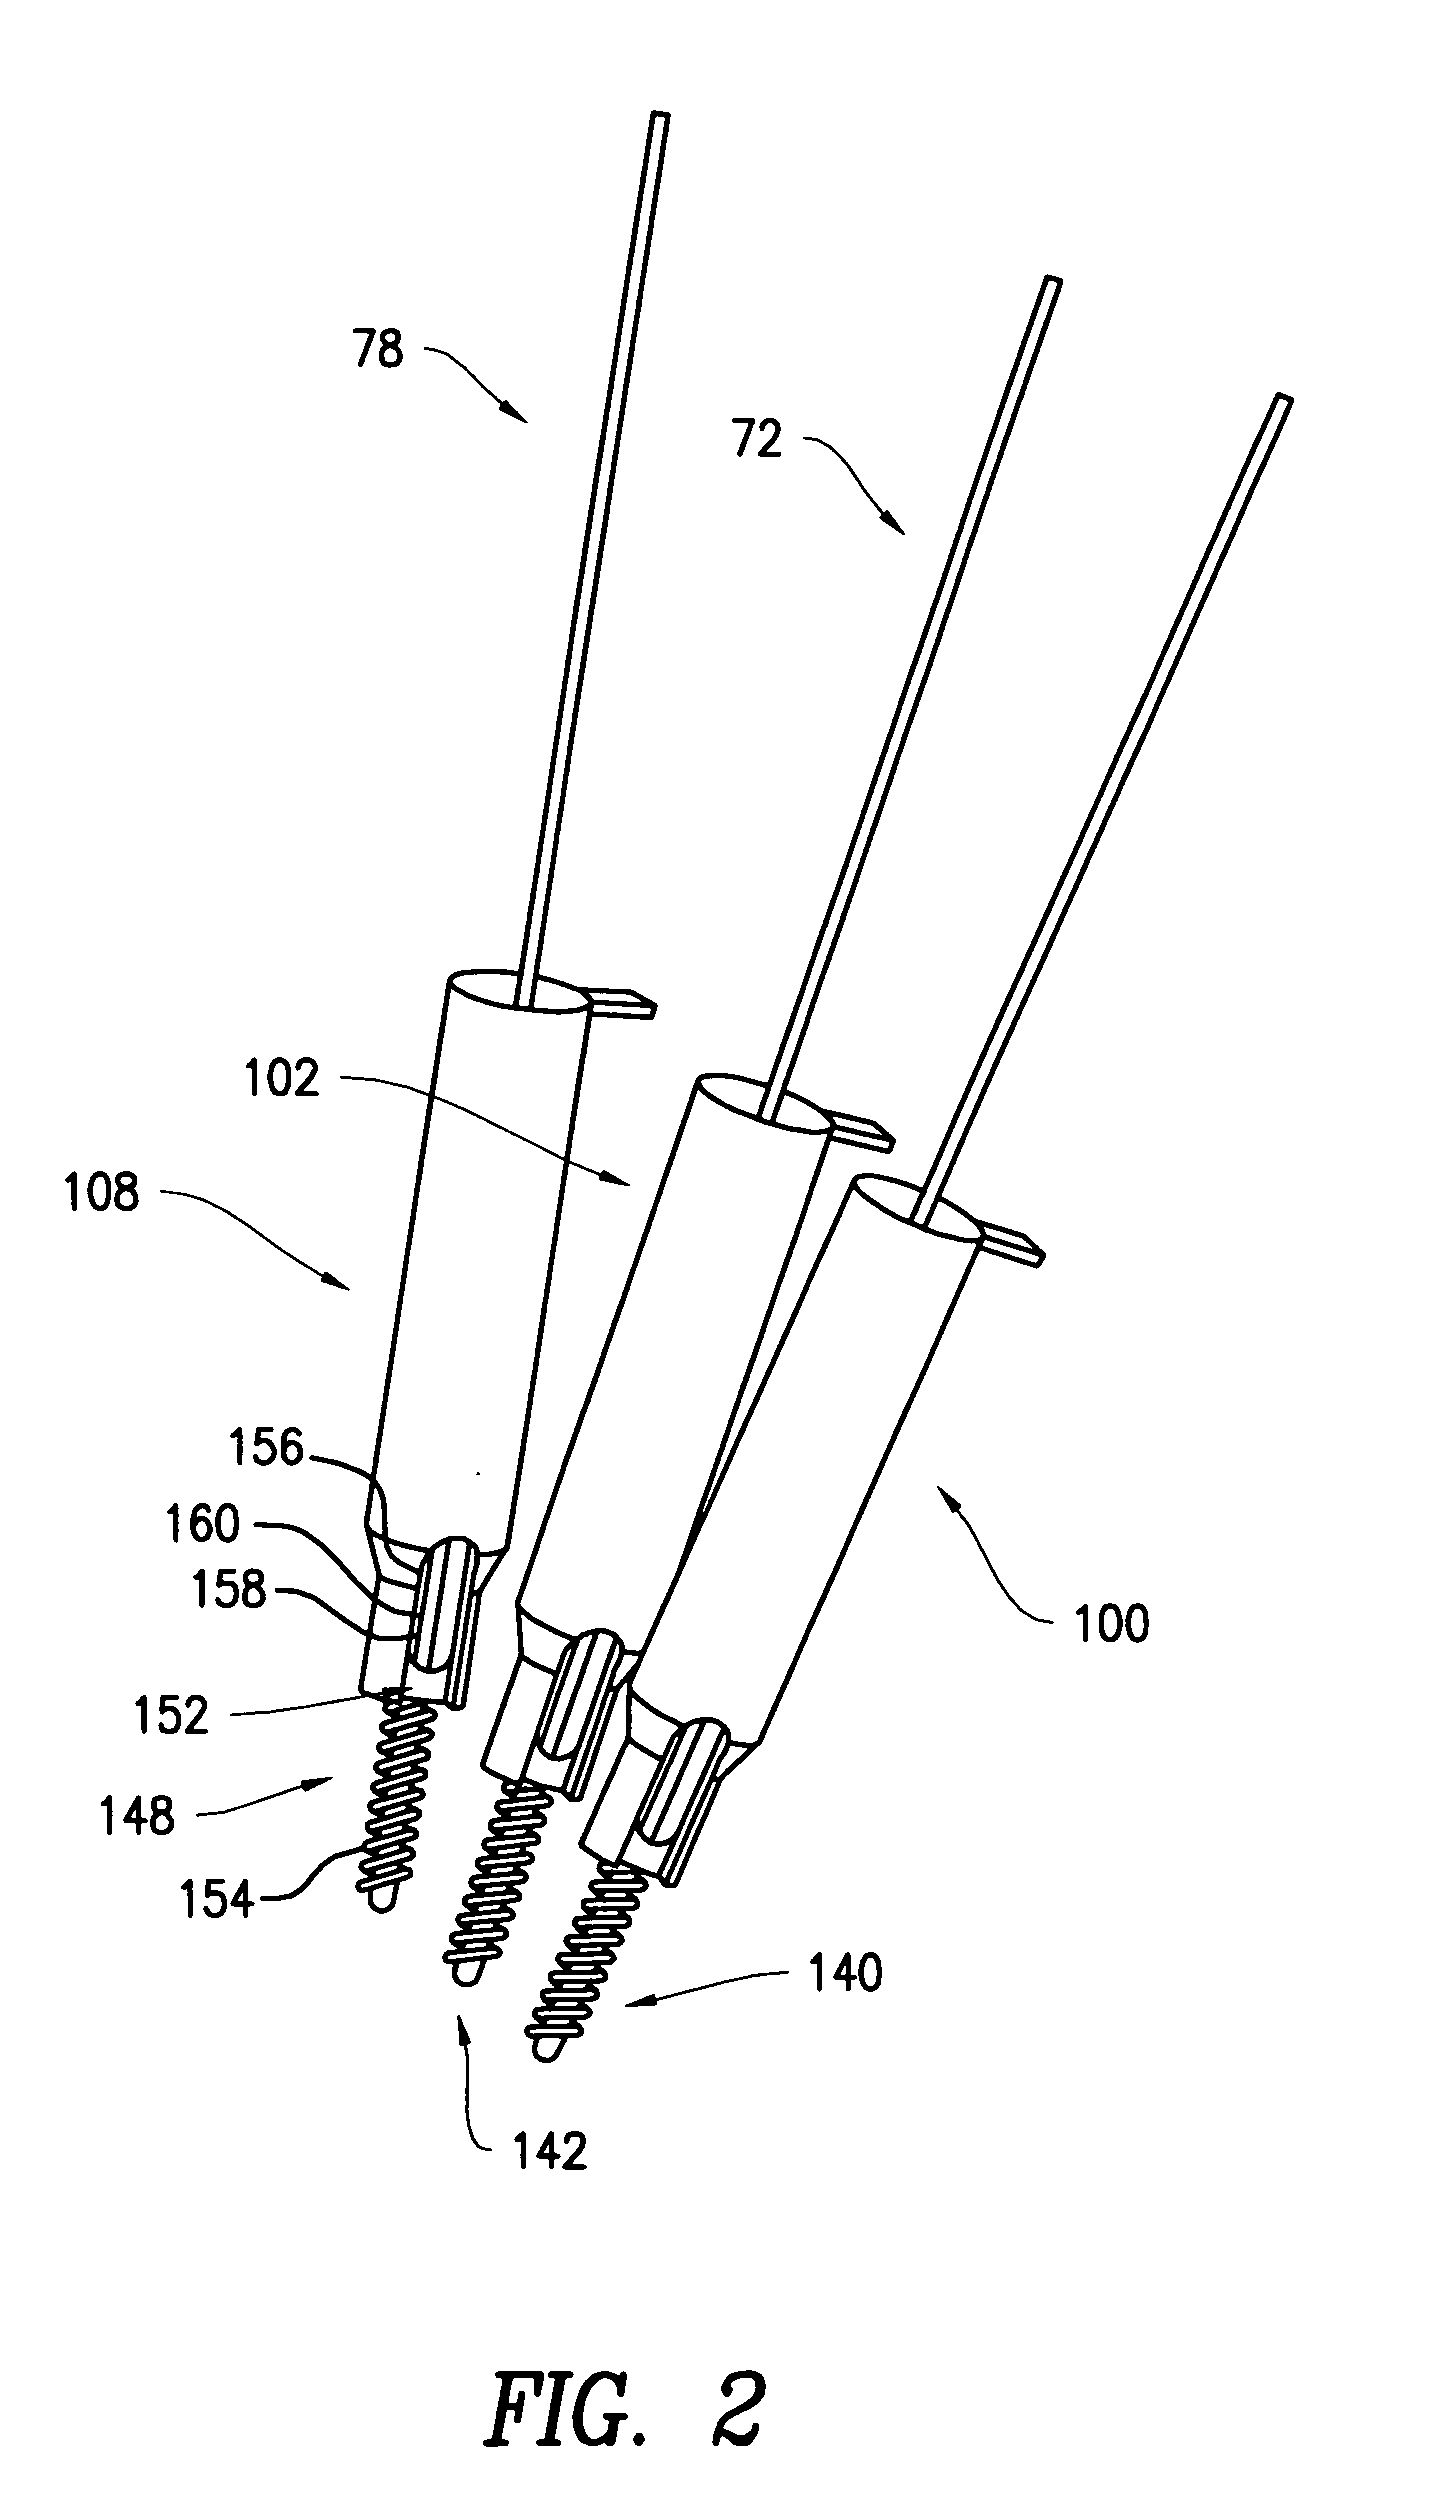 Rod contouring alignment linkage